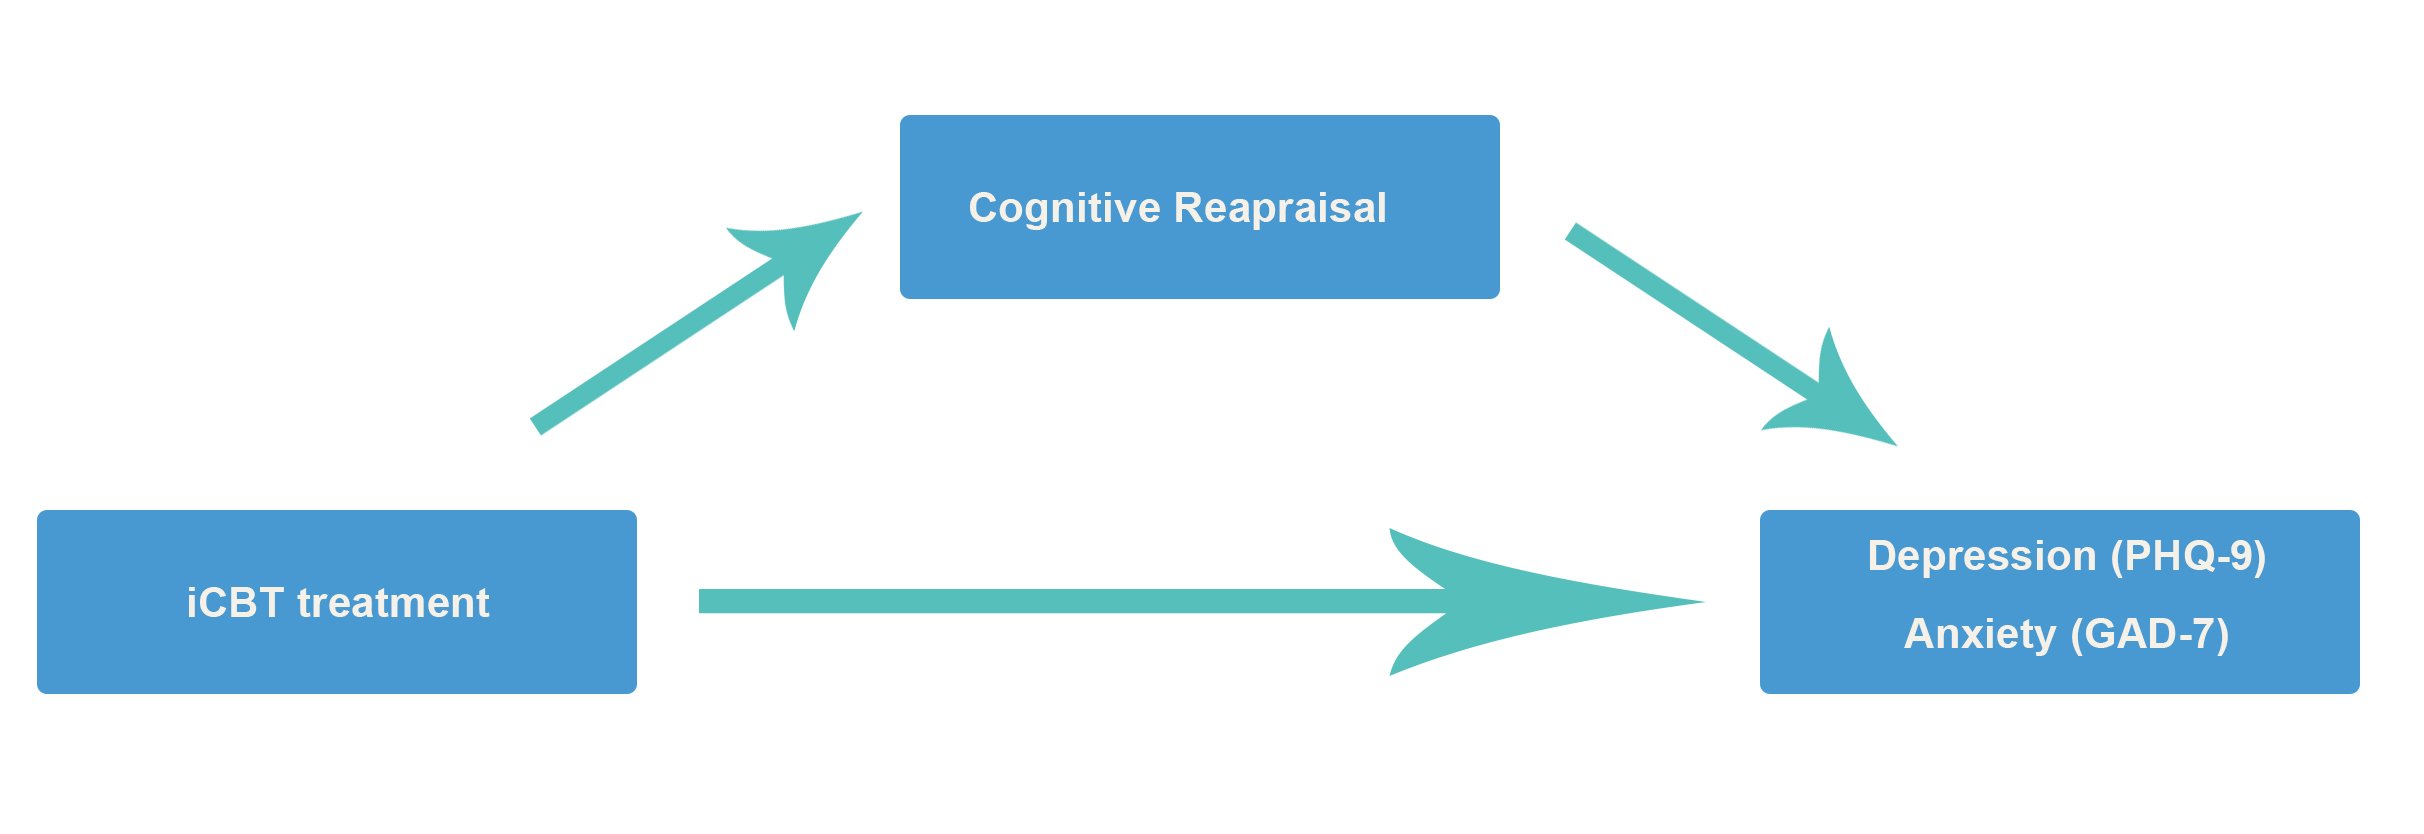 A model showing the significant pathway of iCBT effects on anxiety and depression outcomes through cognitive reappraisal.